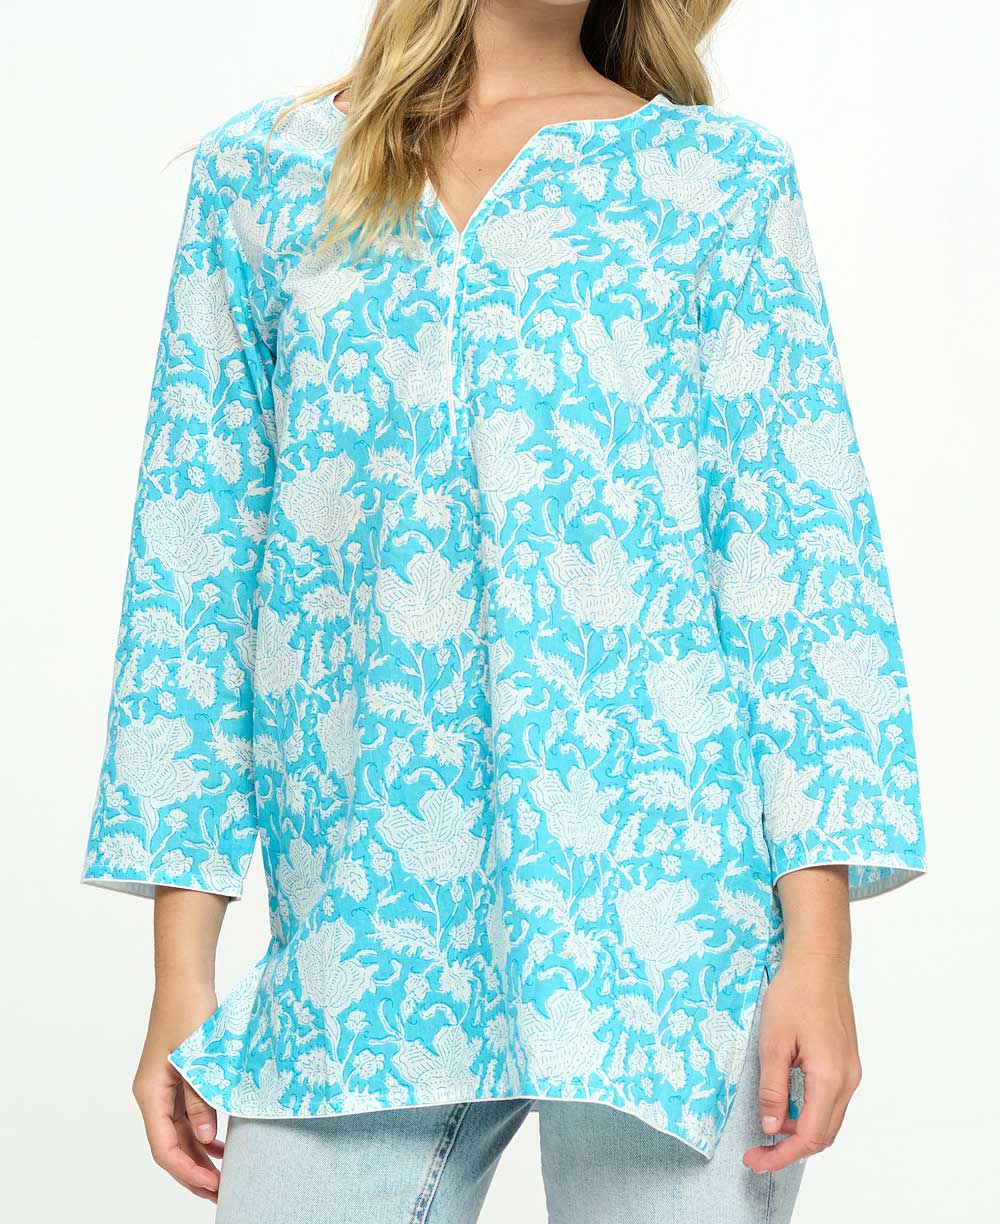 Embroidered Eyelet Turquoise Cotton Tunic Top